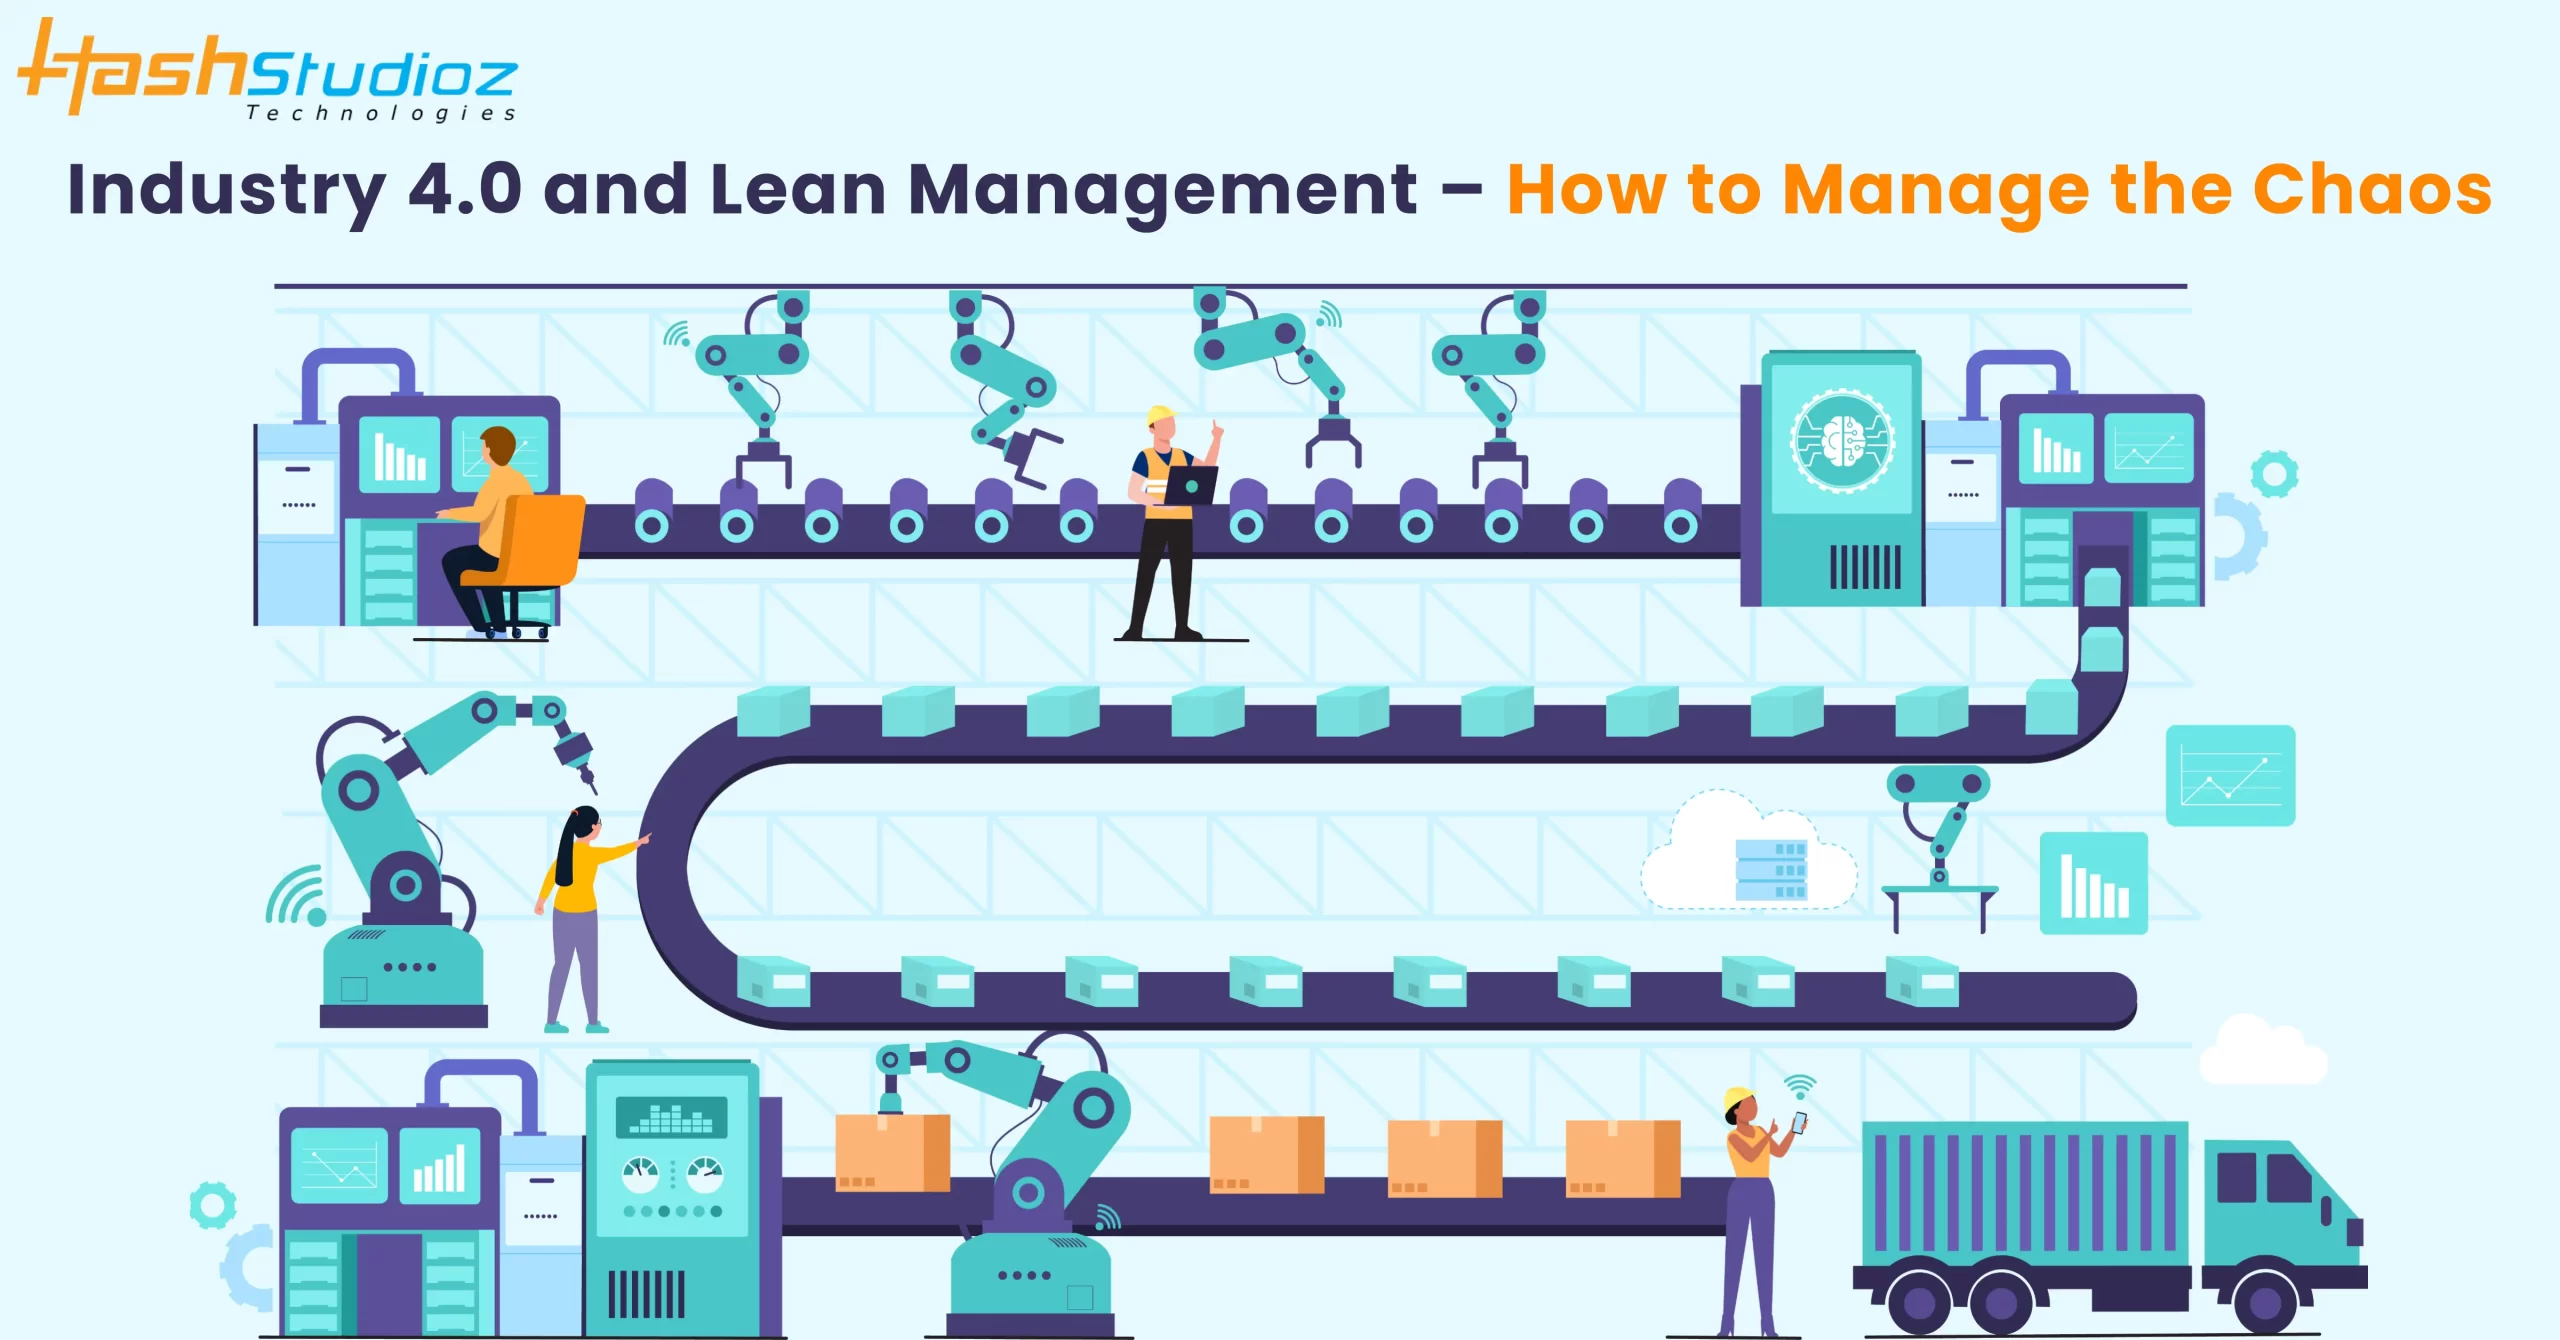 Industry 4.0 and Lean Management – How to Manage the Chaos